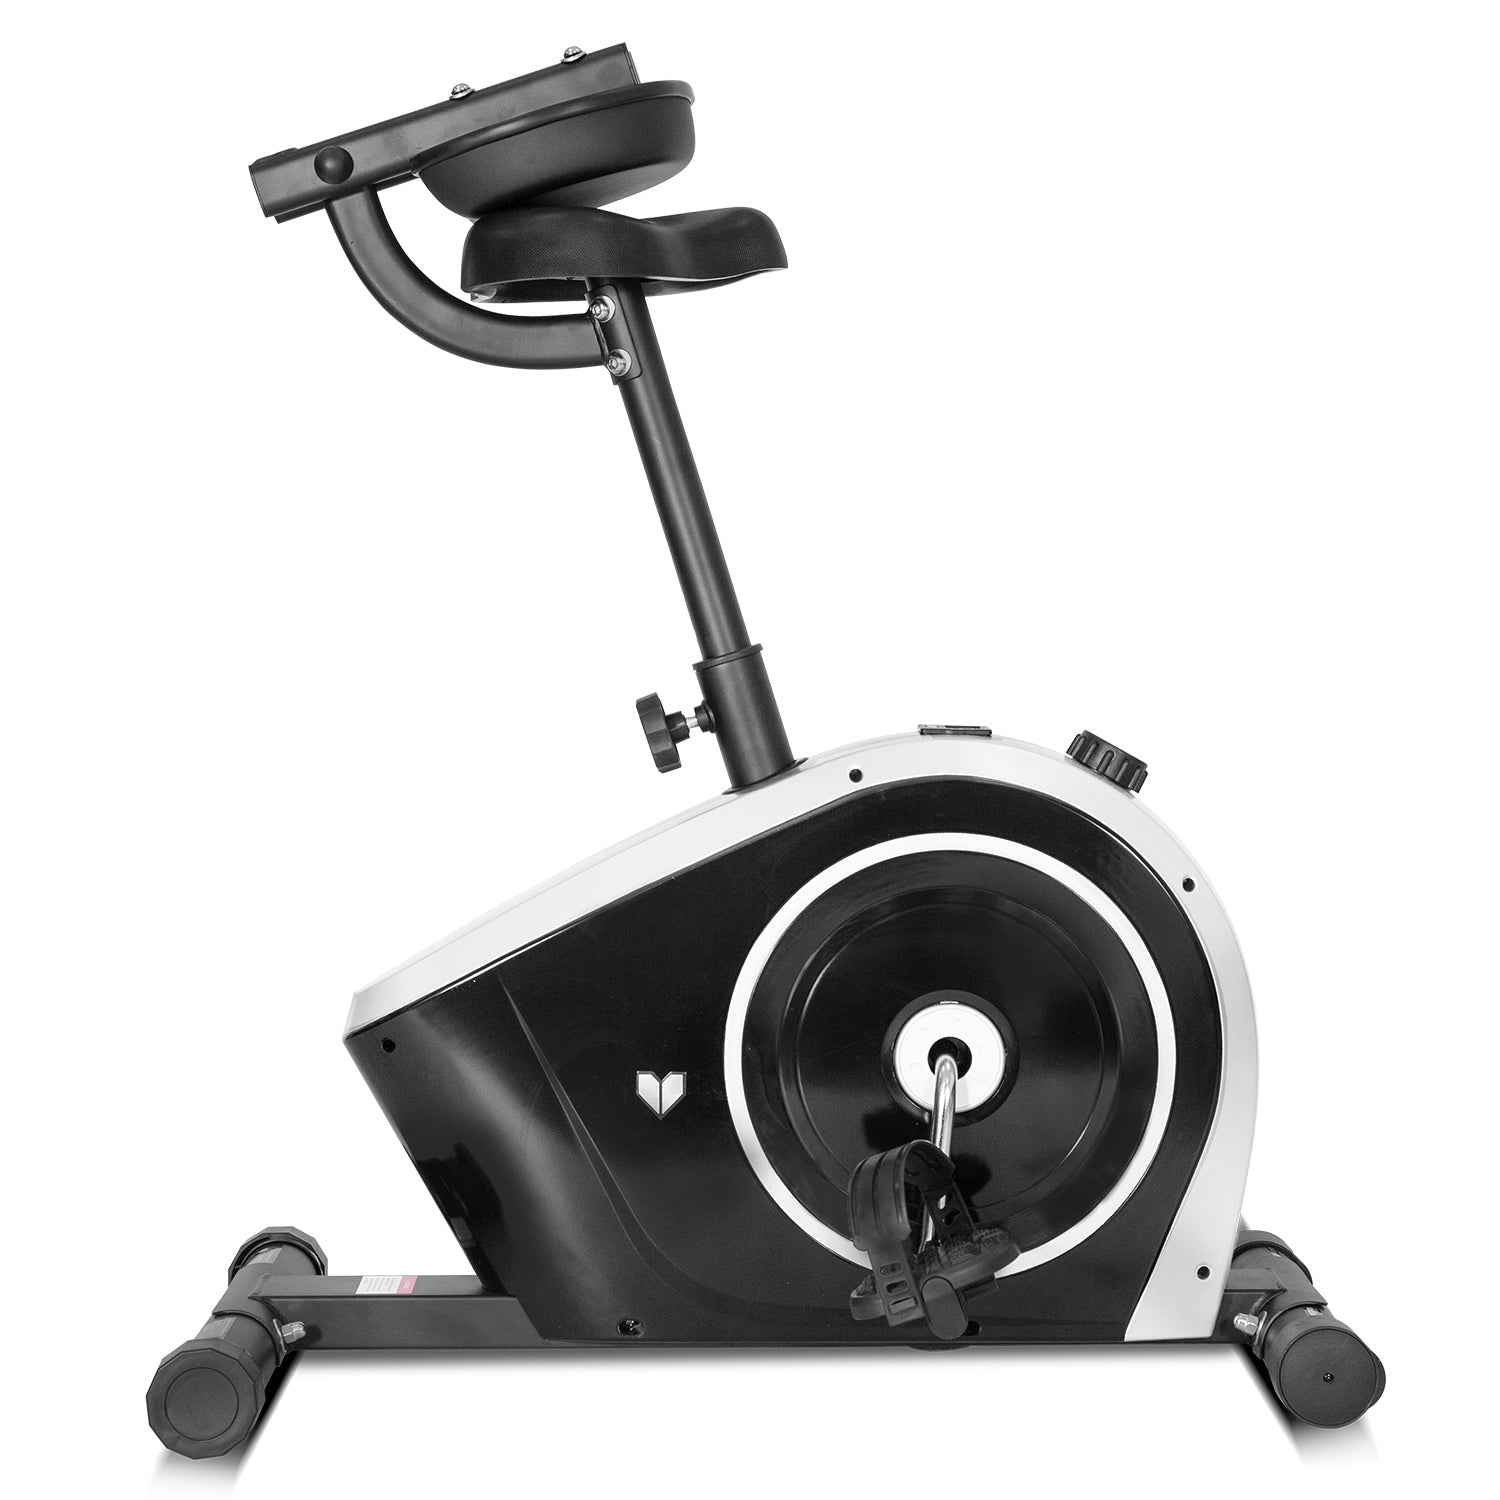 Lifespan Fitness Cyclestation 3 Exercise Bike with ErgoDesk Automatic Standing Desk 180cm in White/Black